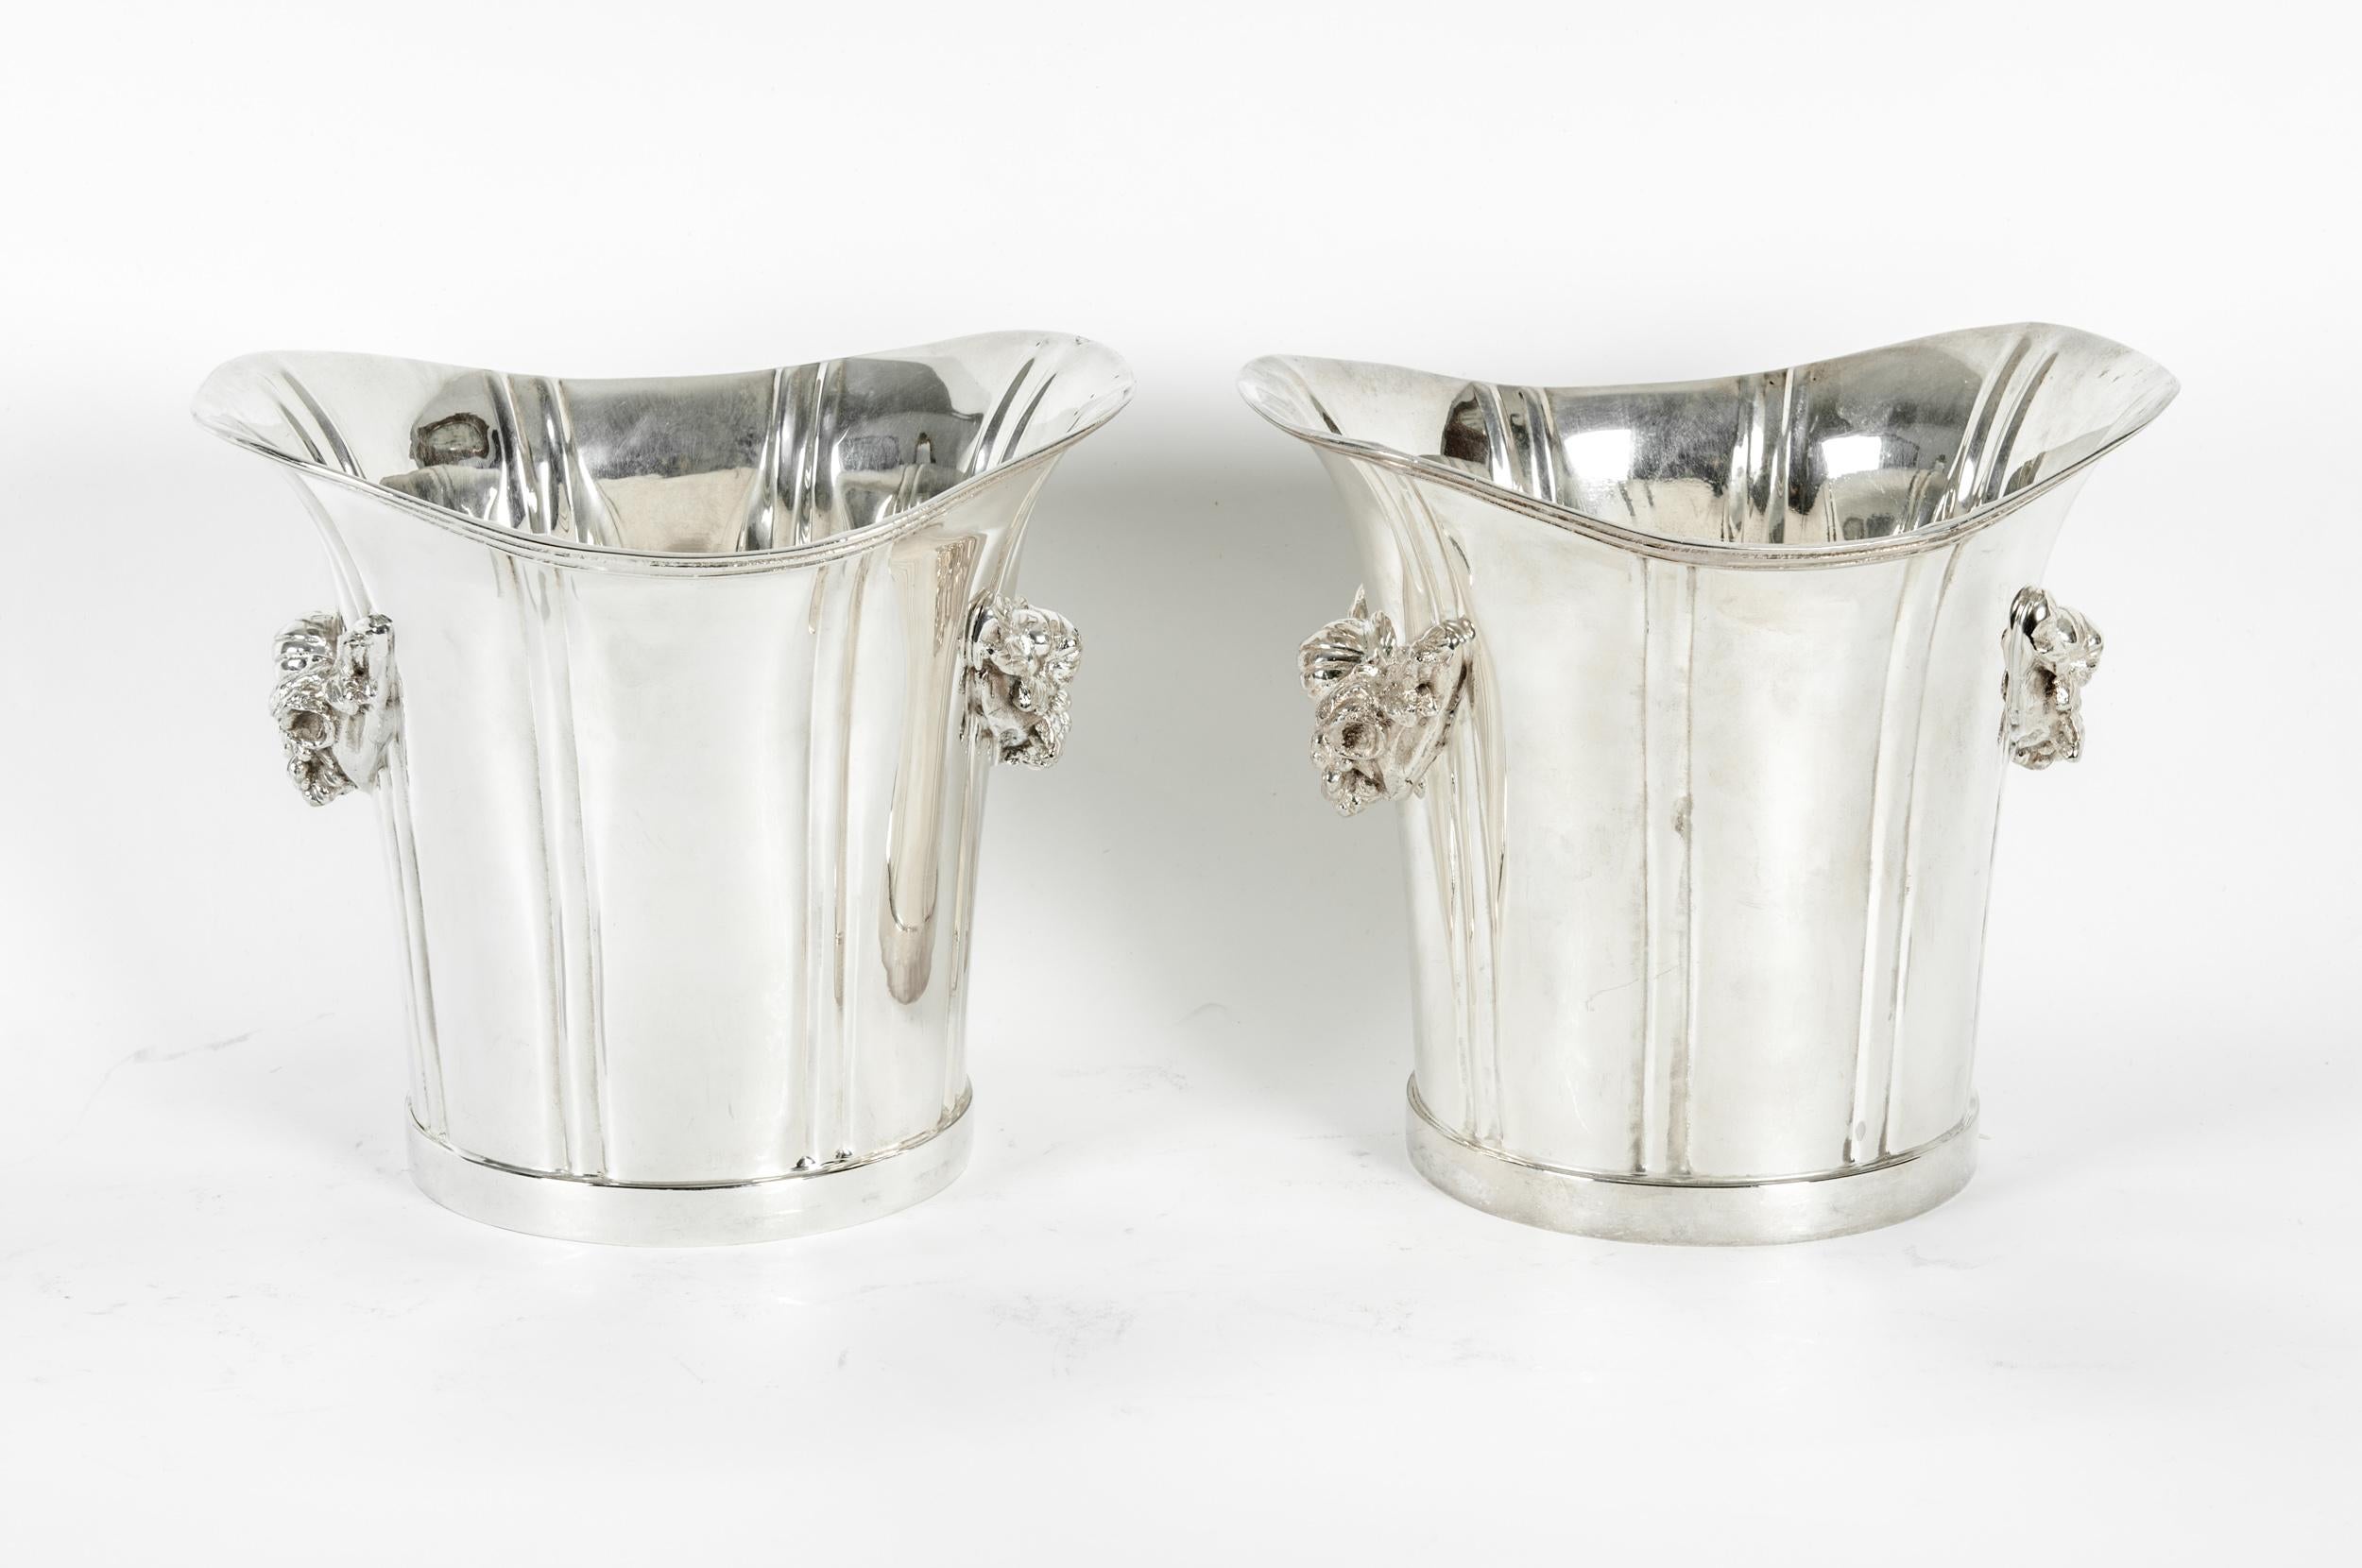 Mid-20th century English pair silver plated ice bucket / wine cooler with exterior design details. Each one is in great vintage condition. Minor wear consistent with age / use. Each ice bucket is about 7.9 inches high x 9 inches top diameter.